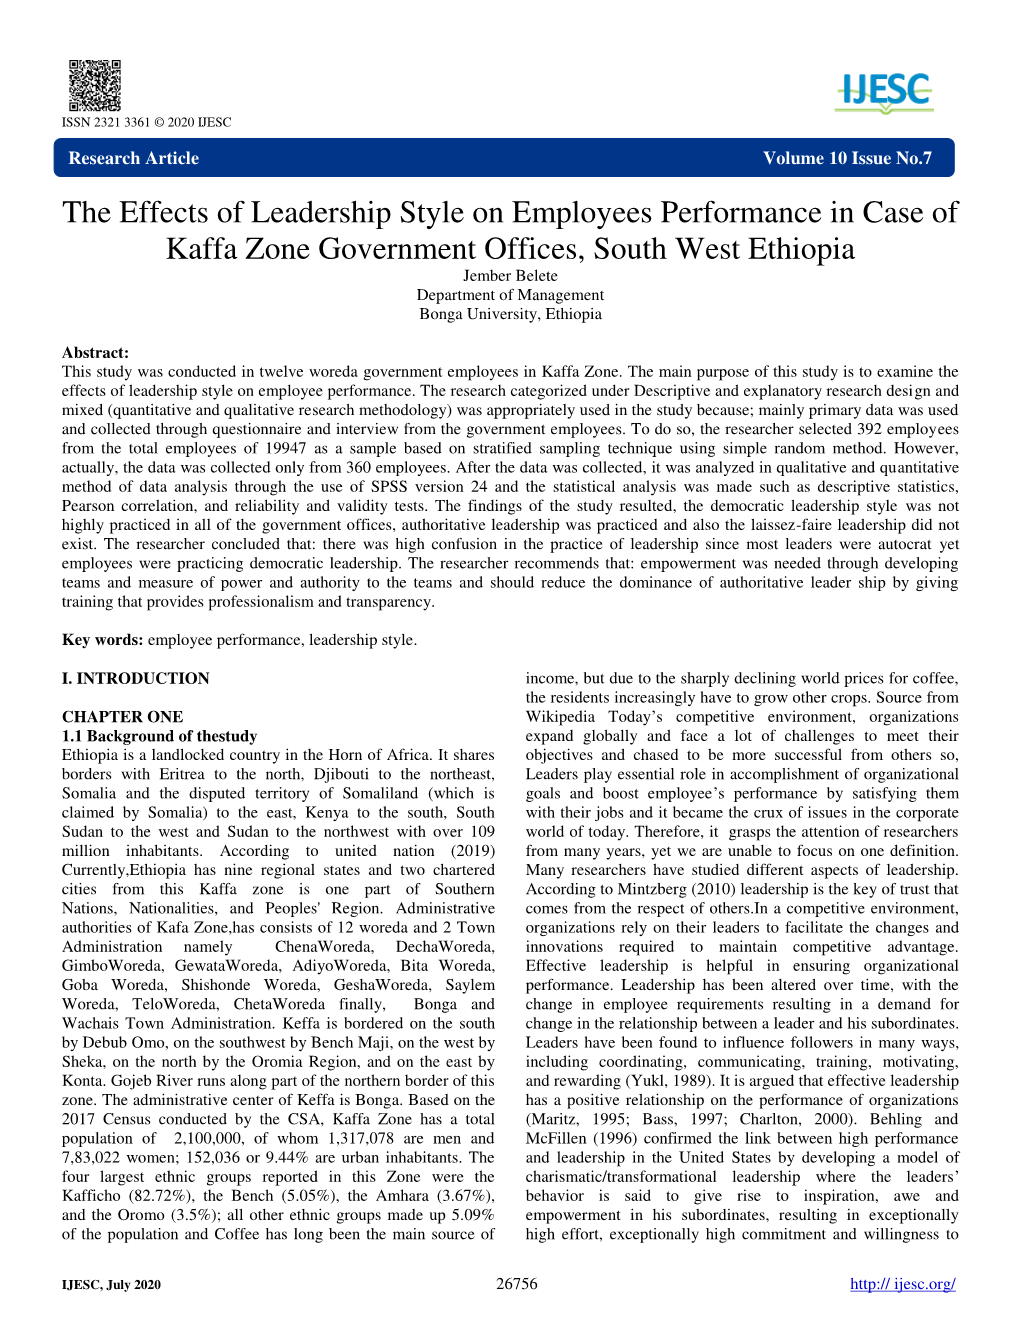 The Effects of Leadership Style on Employees Performance in Case Of